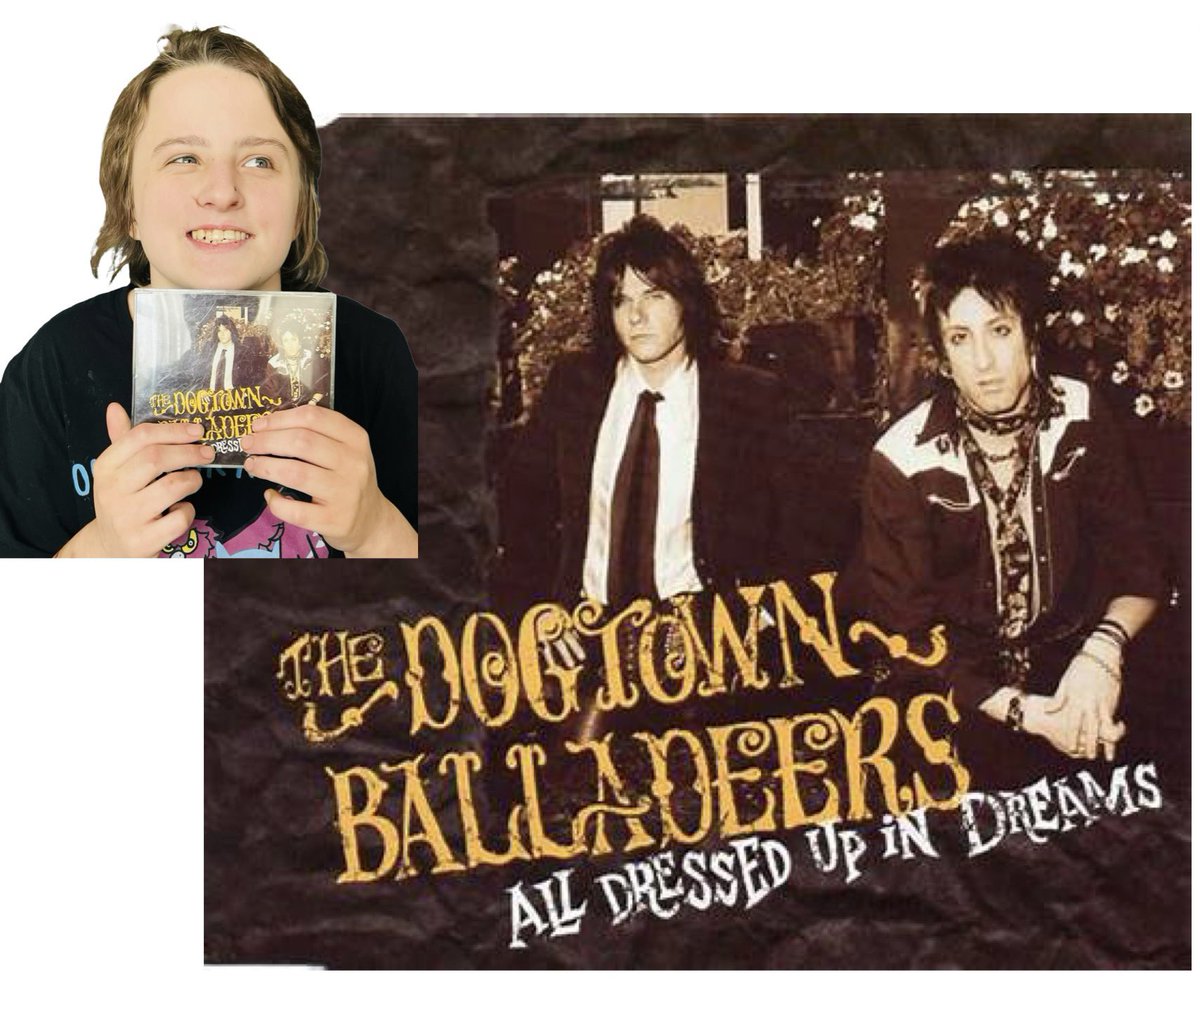 Well, wouldn’t you know…Emma got a new CD that arrived today which just so happens to feature her friend @jackybambam933 rocking the kit with #DogtownBalladeers. She just said, “Jacky plays the drums.” @933WMMR #DrackPack #WMMRftv #EmmaRocksAutism #WordsAndMusic